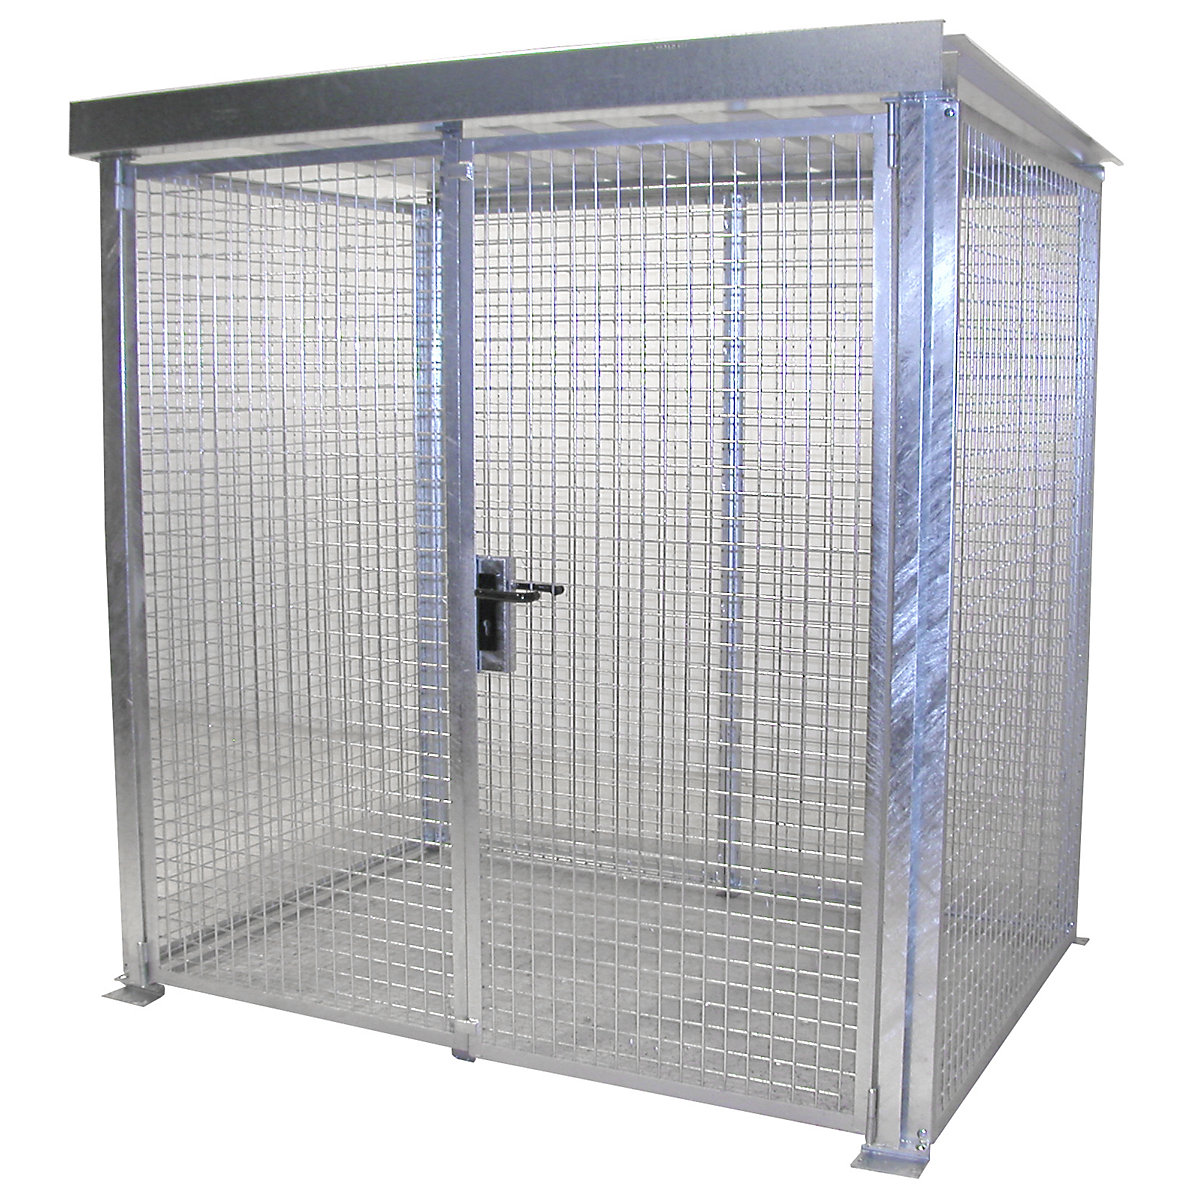 EUROKRAFTpro – Mesh gas cylinder cage, with roof and double hinged doors, WxD 2100 x 1500 mm